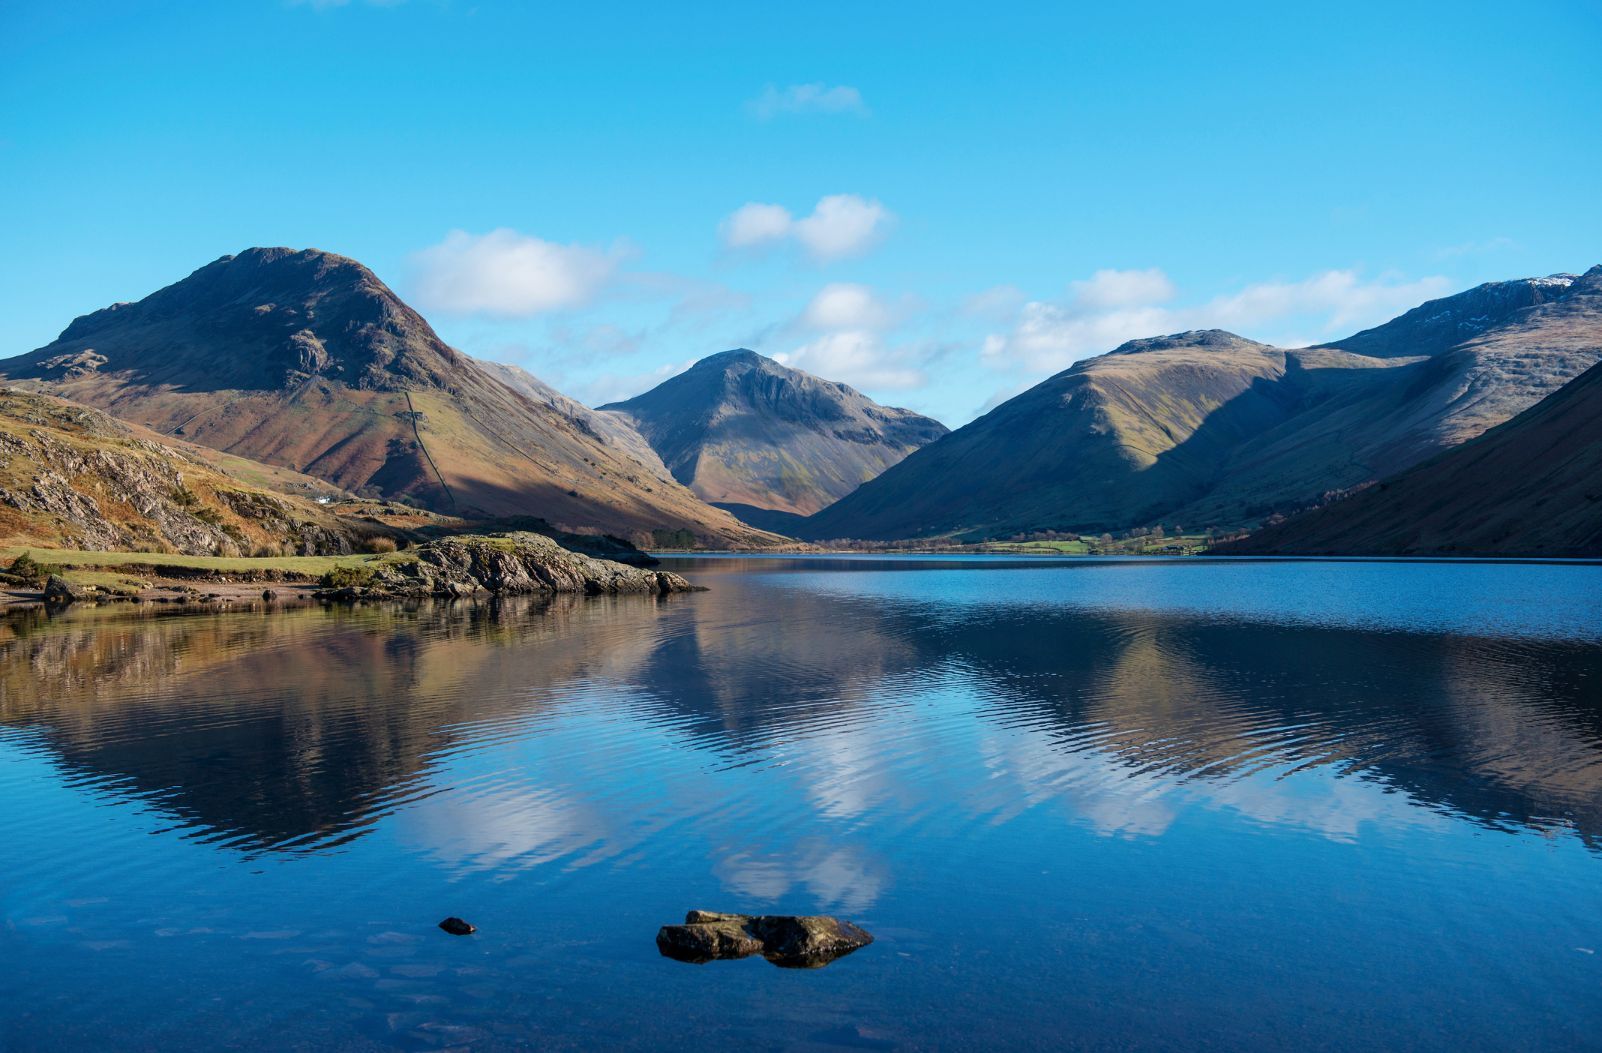 Wasdale Head looking across Wast Water, England's deepest lake. Scafell Pike on the right.